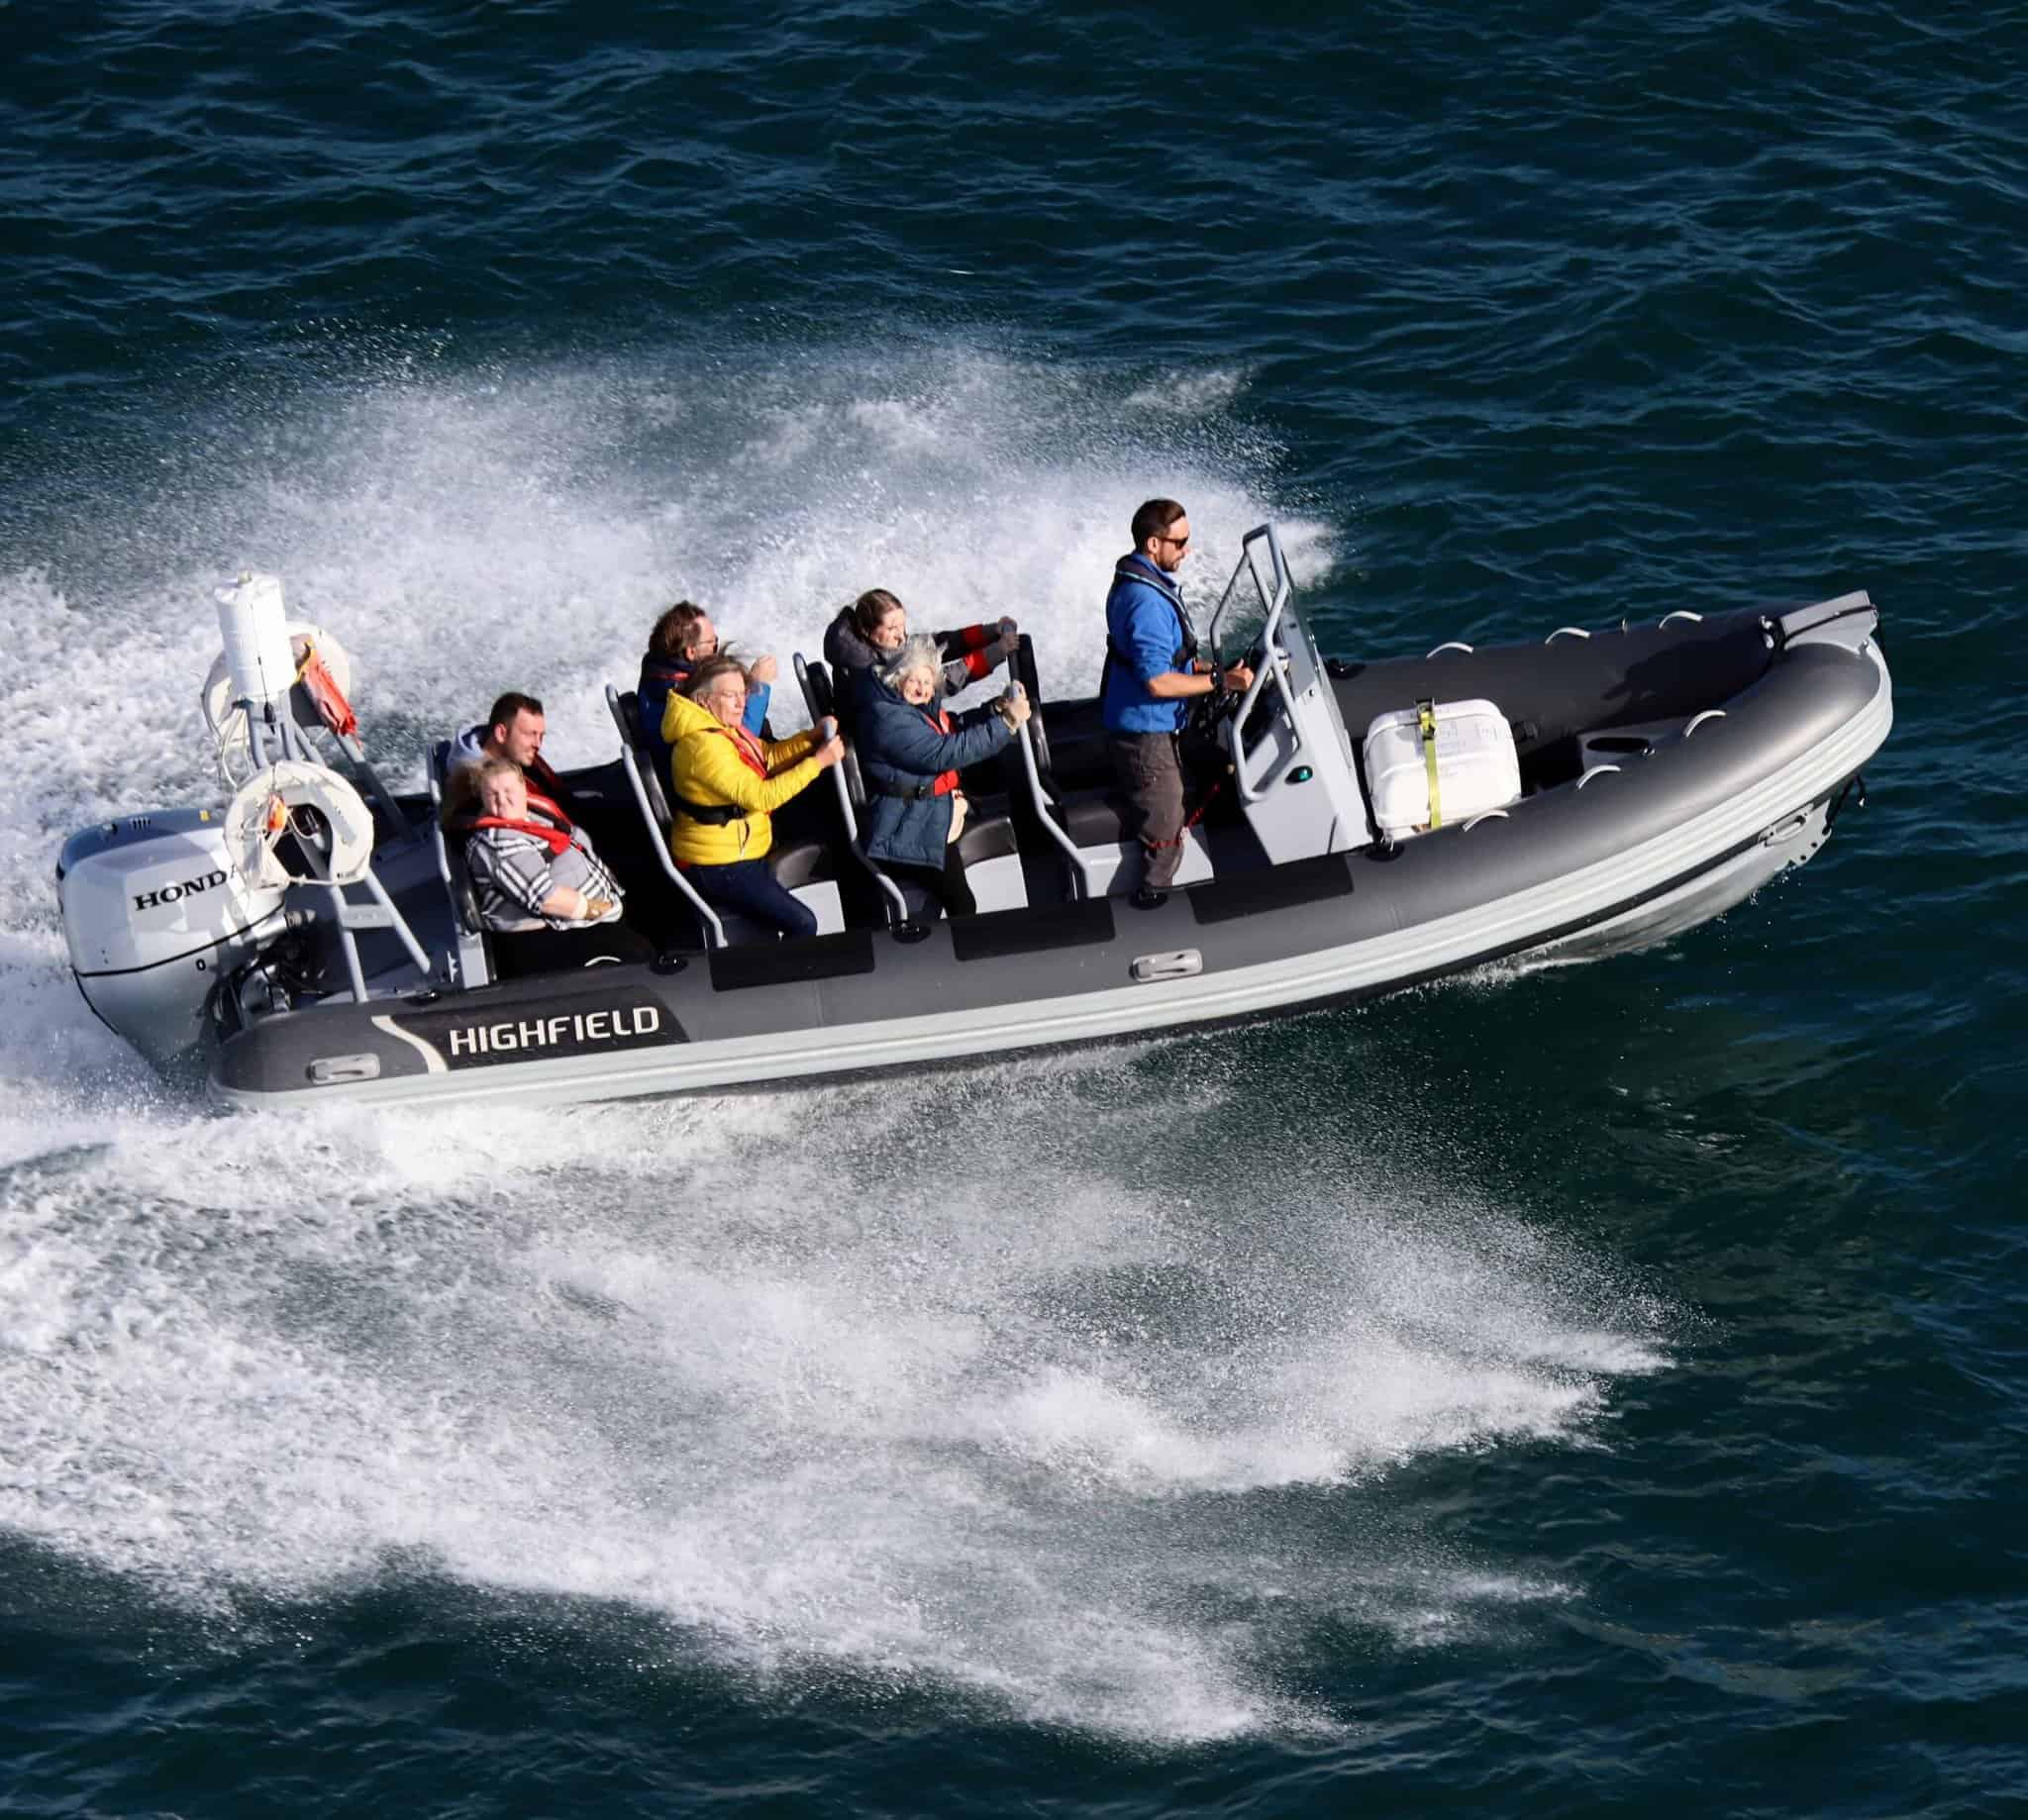 "At Speed" by Adrian Pearce, UK @ RIBs ONLY - Home of the Rigid Inflatable Home